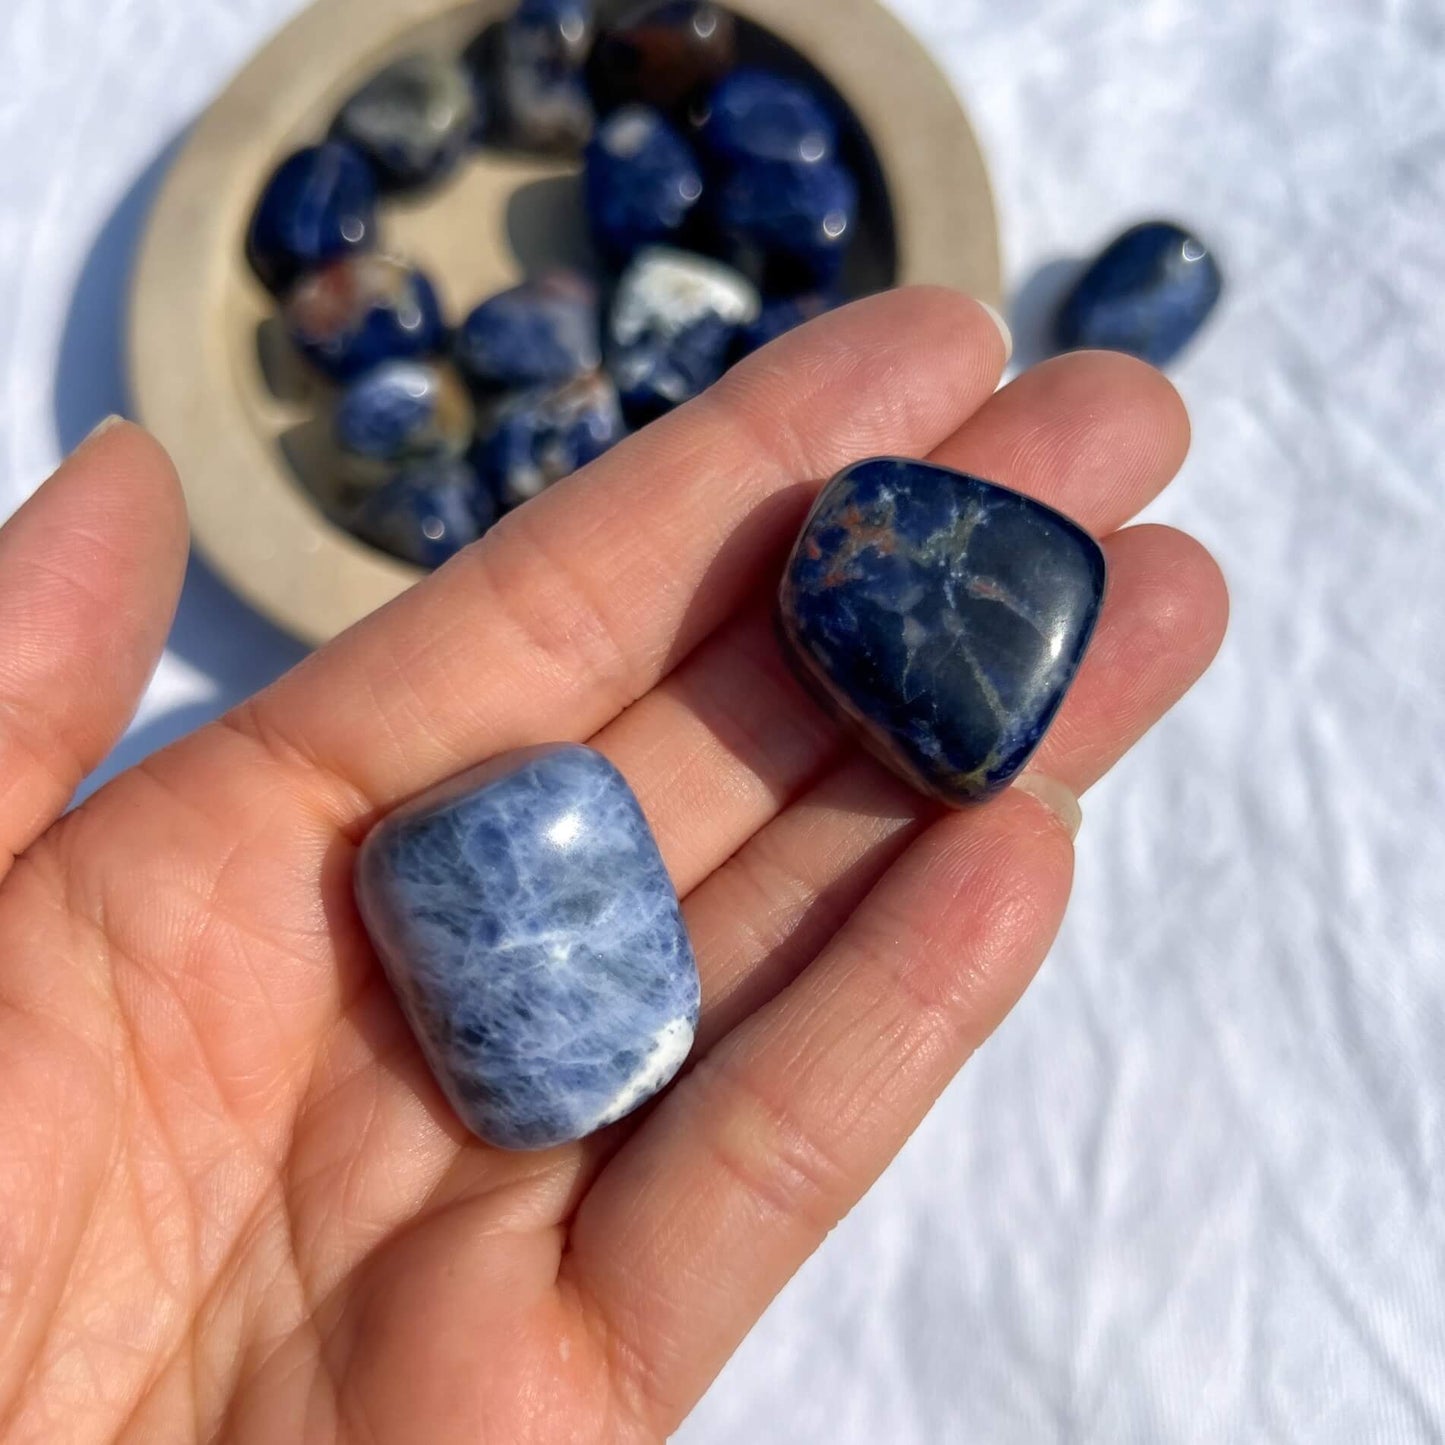 An open hand holding two blue and white large sodalite crystal tumblestones